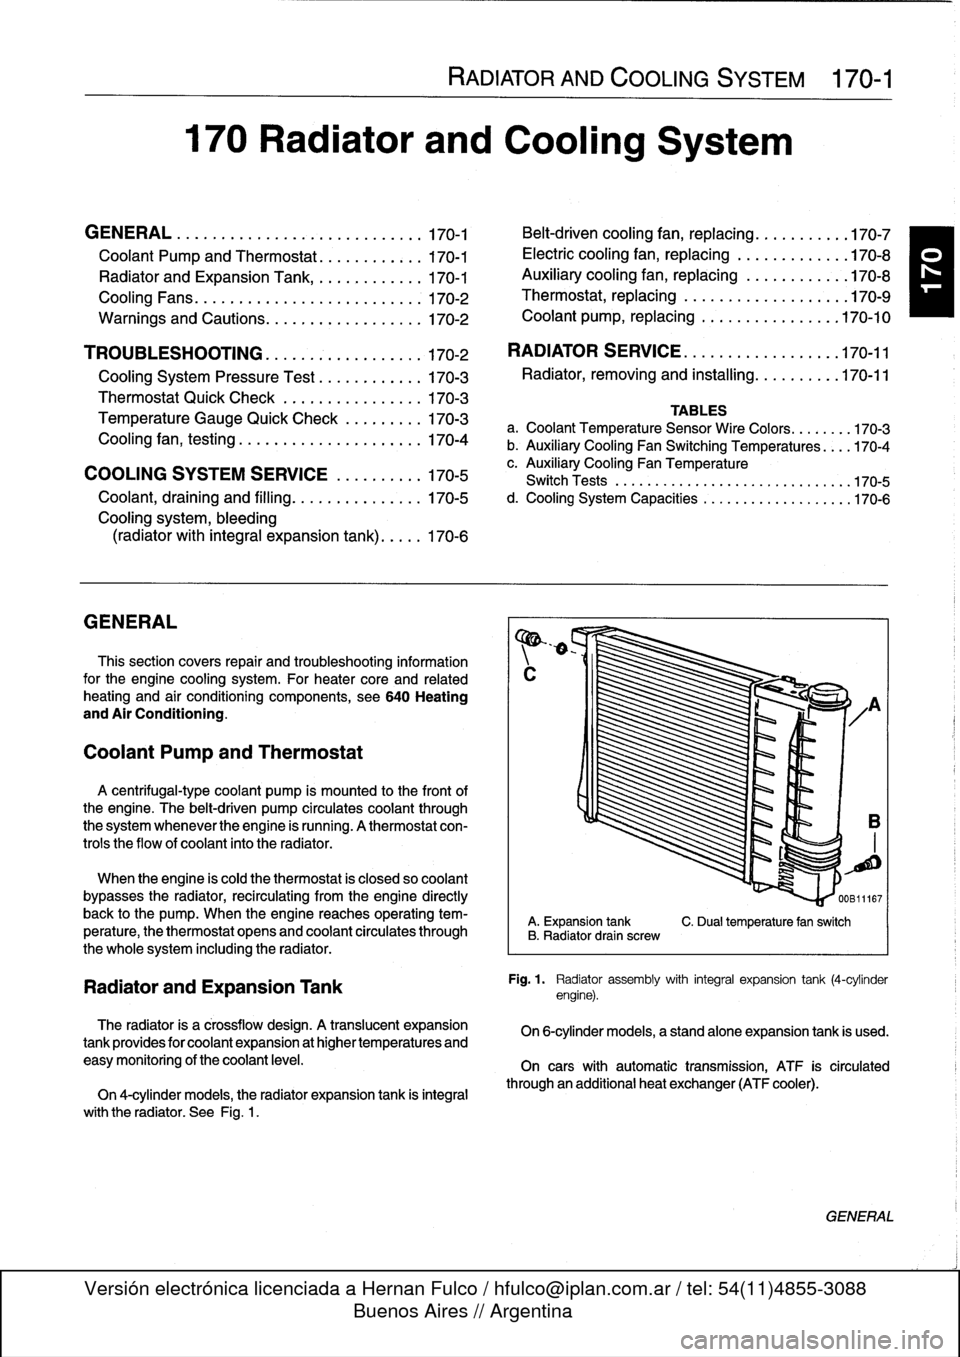 BMW 328i 1994 E36 Workshop Manual 170
Radiator
and
Cooling
System

GENERAL
.
.
.....
.
...
.
.
.
.
.
....
.
.
.
.
.
.
.
.170-1

Coolant
Pump
and
Thermostat
........
.
.
.
.
170-1

Radiator
and
Expansion
Tank
.........
.
...
170-1

Coo